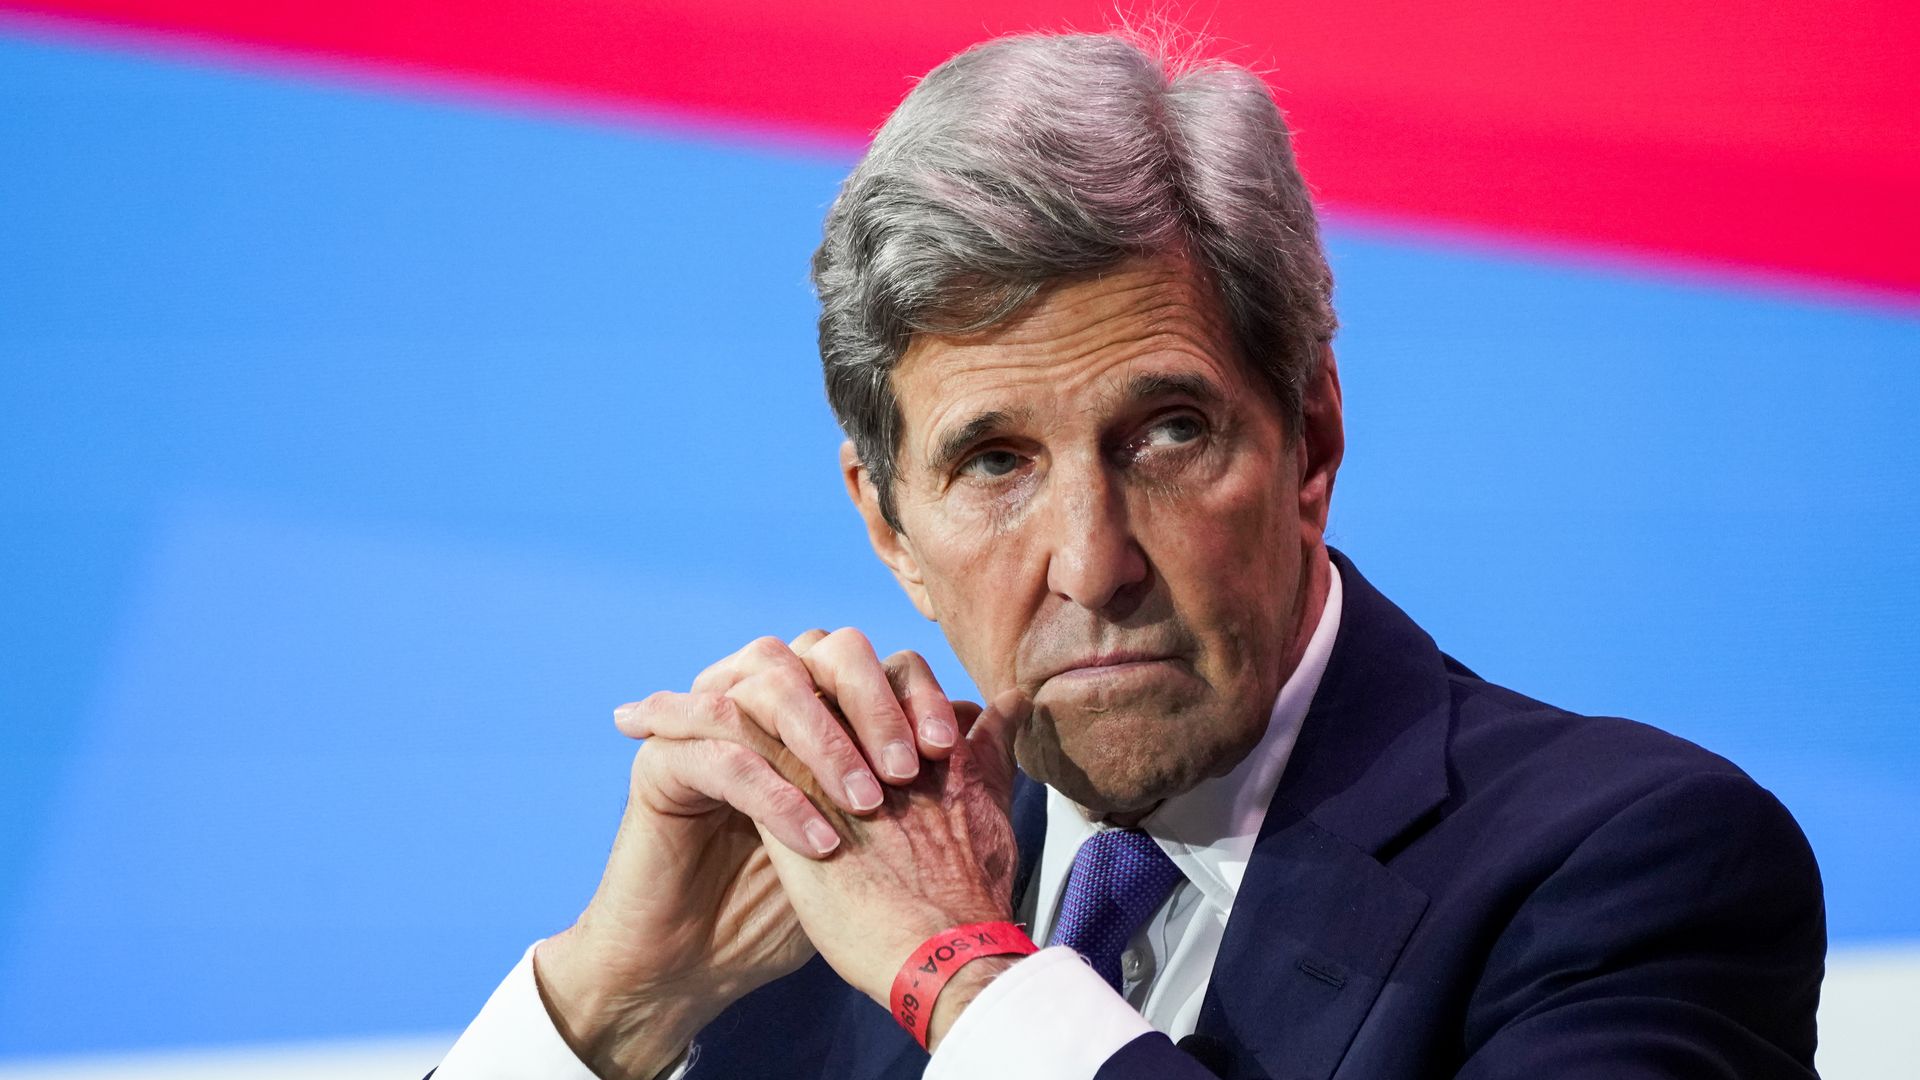 John Kerry, U.S. special presidential envoy for climate, speaks during the CEO Summit of the Americas hosted by the US Chamber of Commerce in Los Angeles, California, US, on Thursday, June 9, 2022. 